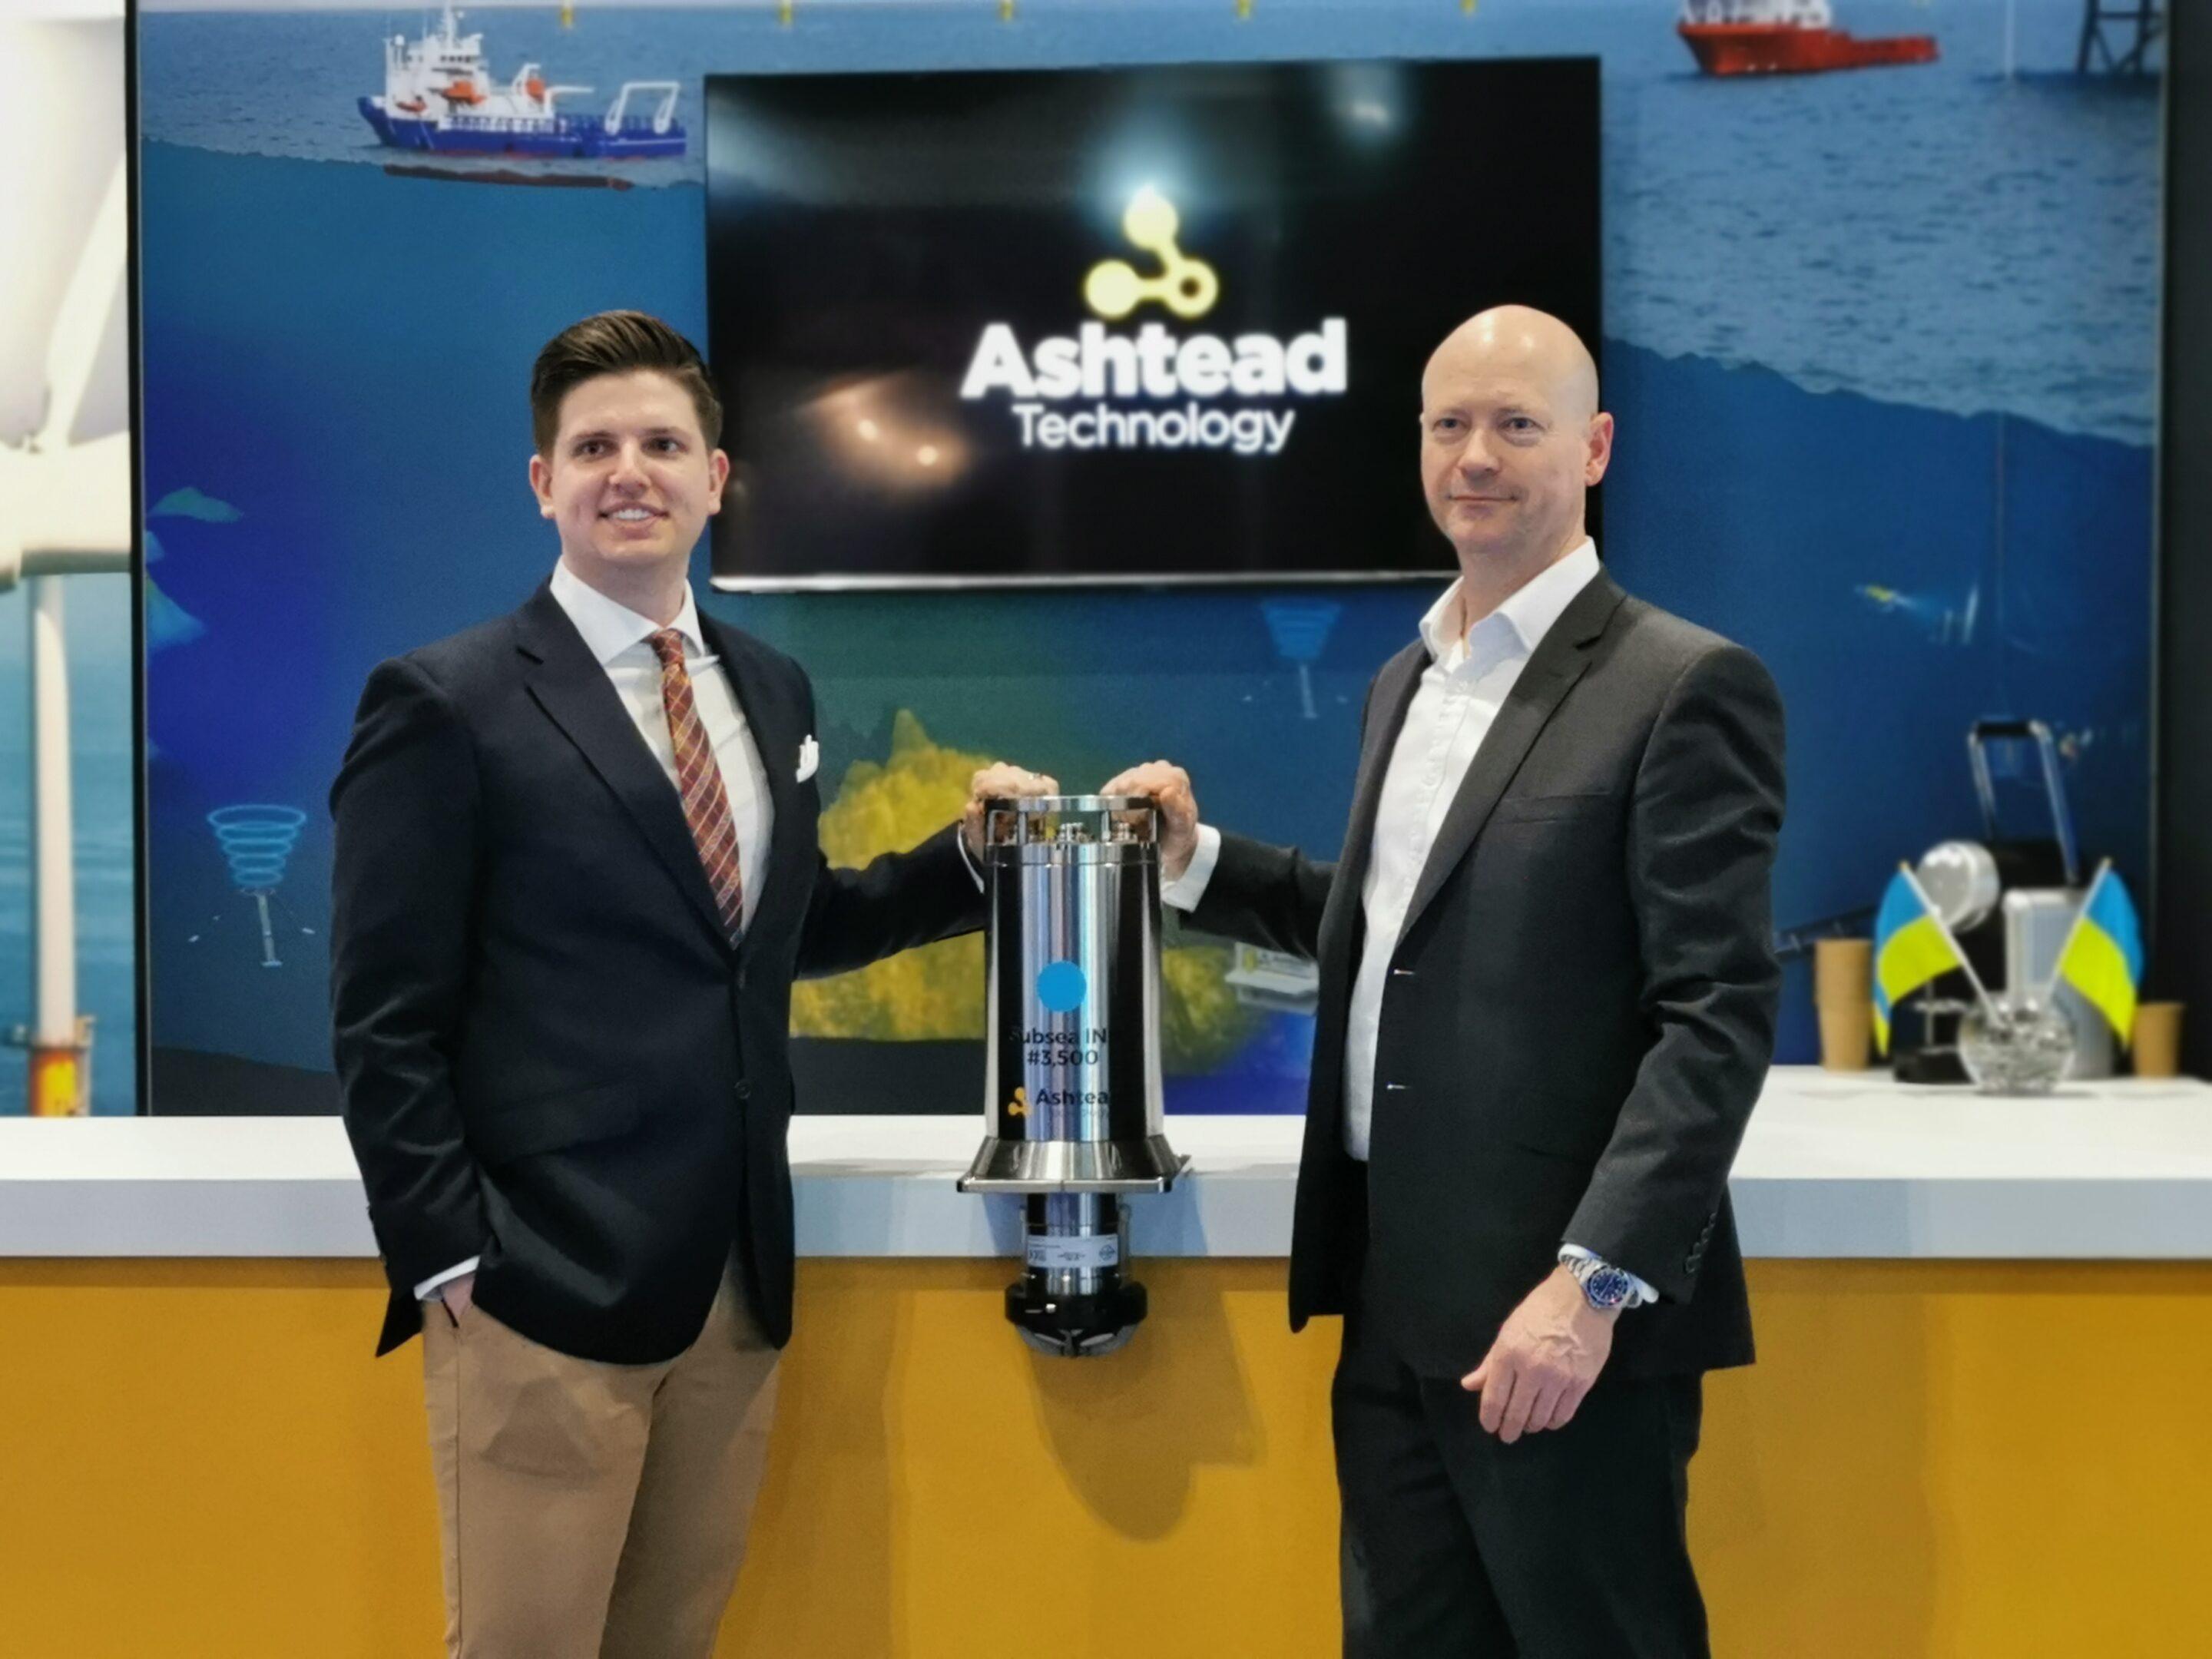 Product: Ashtead Technology strengthens its rental fleet with investment in iXblue technologies - iXblue